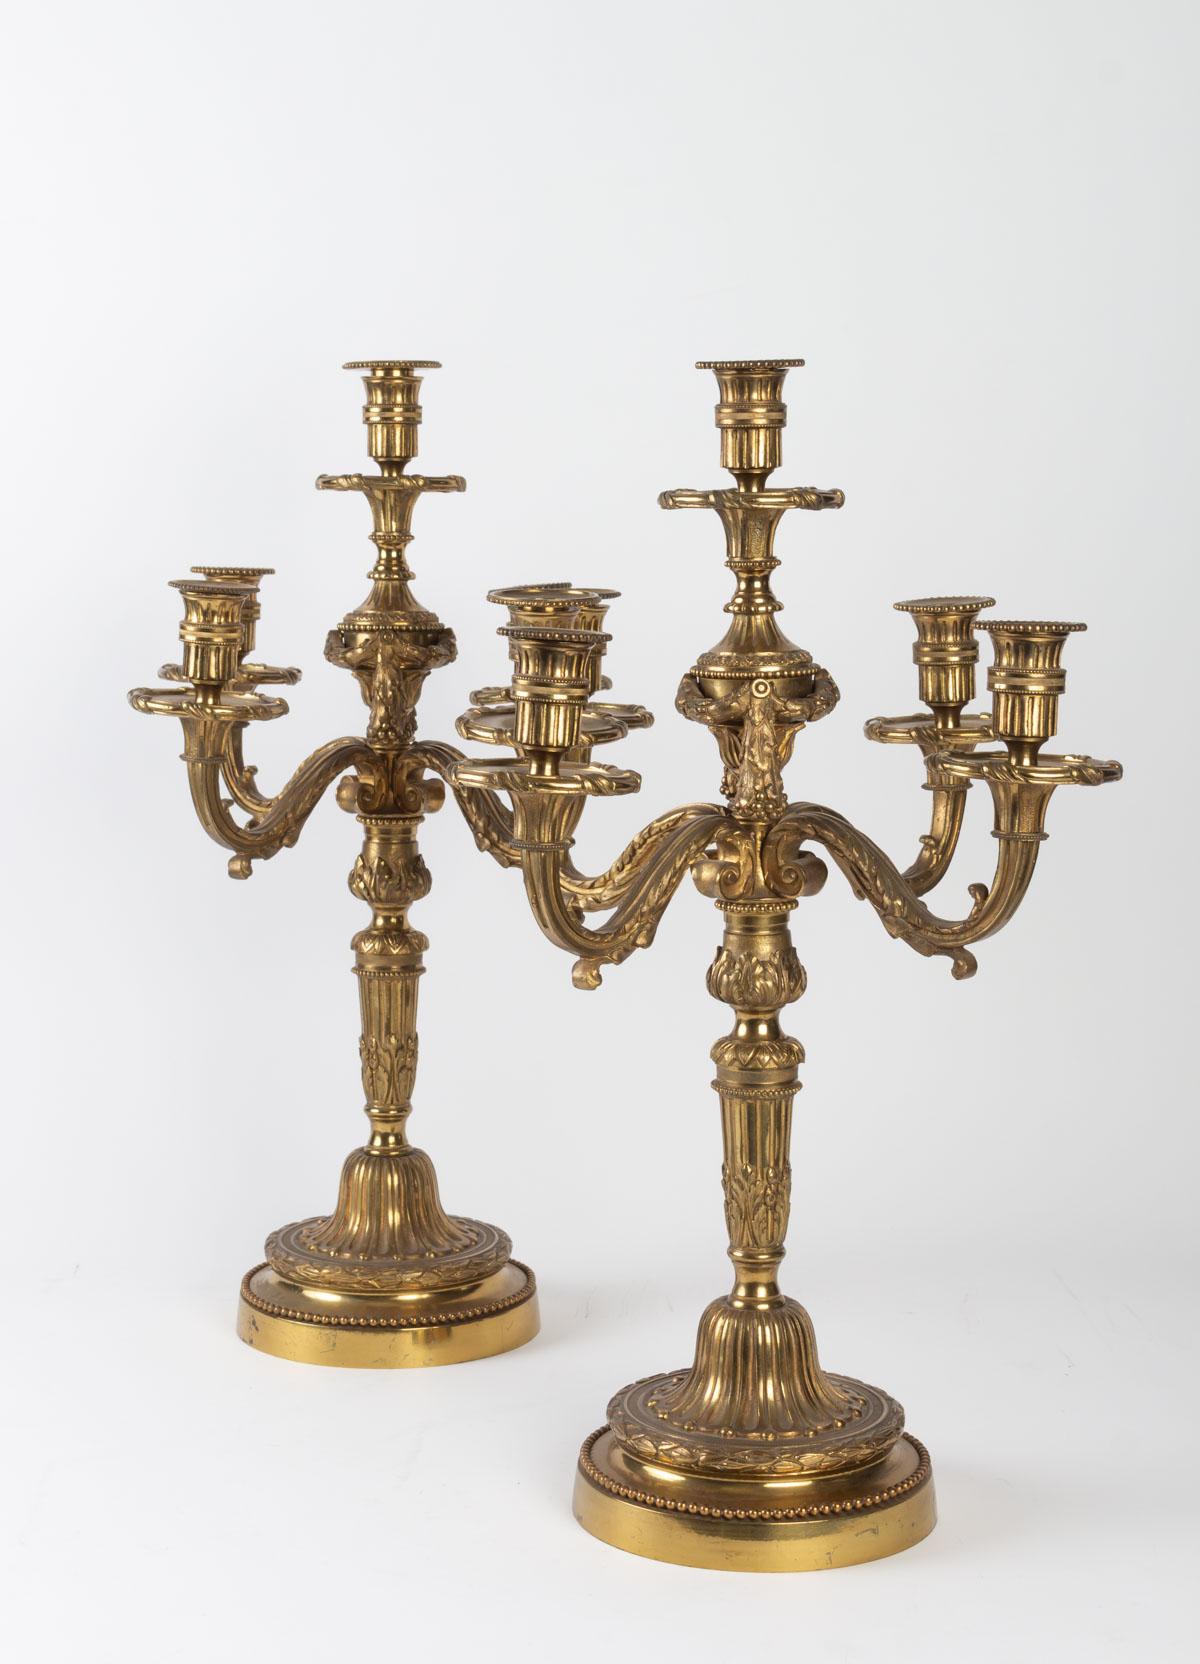 Pair of Louis XVI style 5-light candelabra in gilded bronze, original gilding, French work, circa 1860. Wearing in the gilding, one of the branches slightly twisted.
Measures: H 52cm, L 35cm.